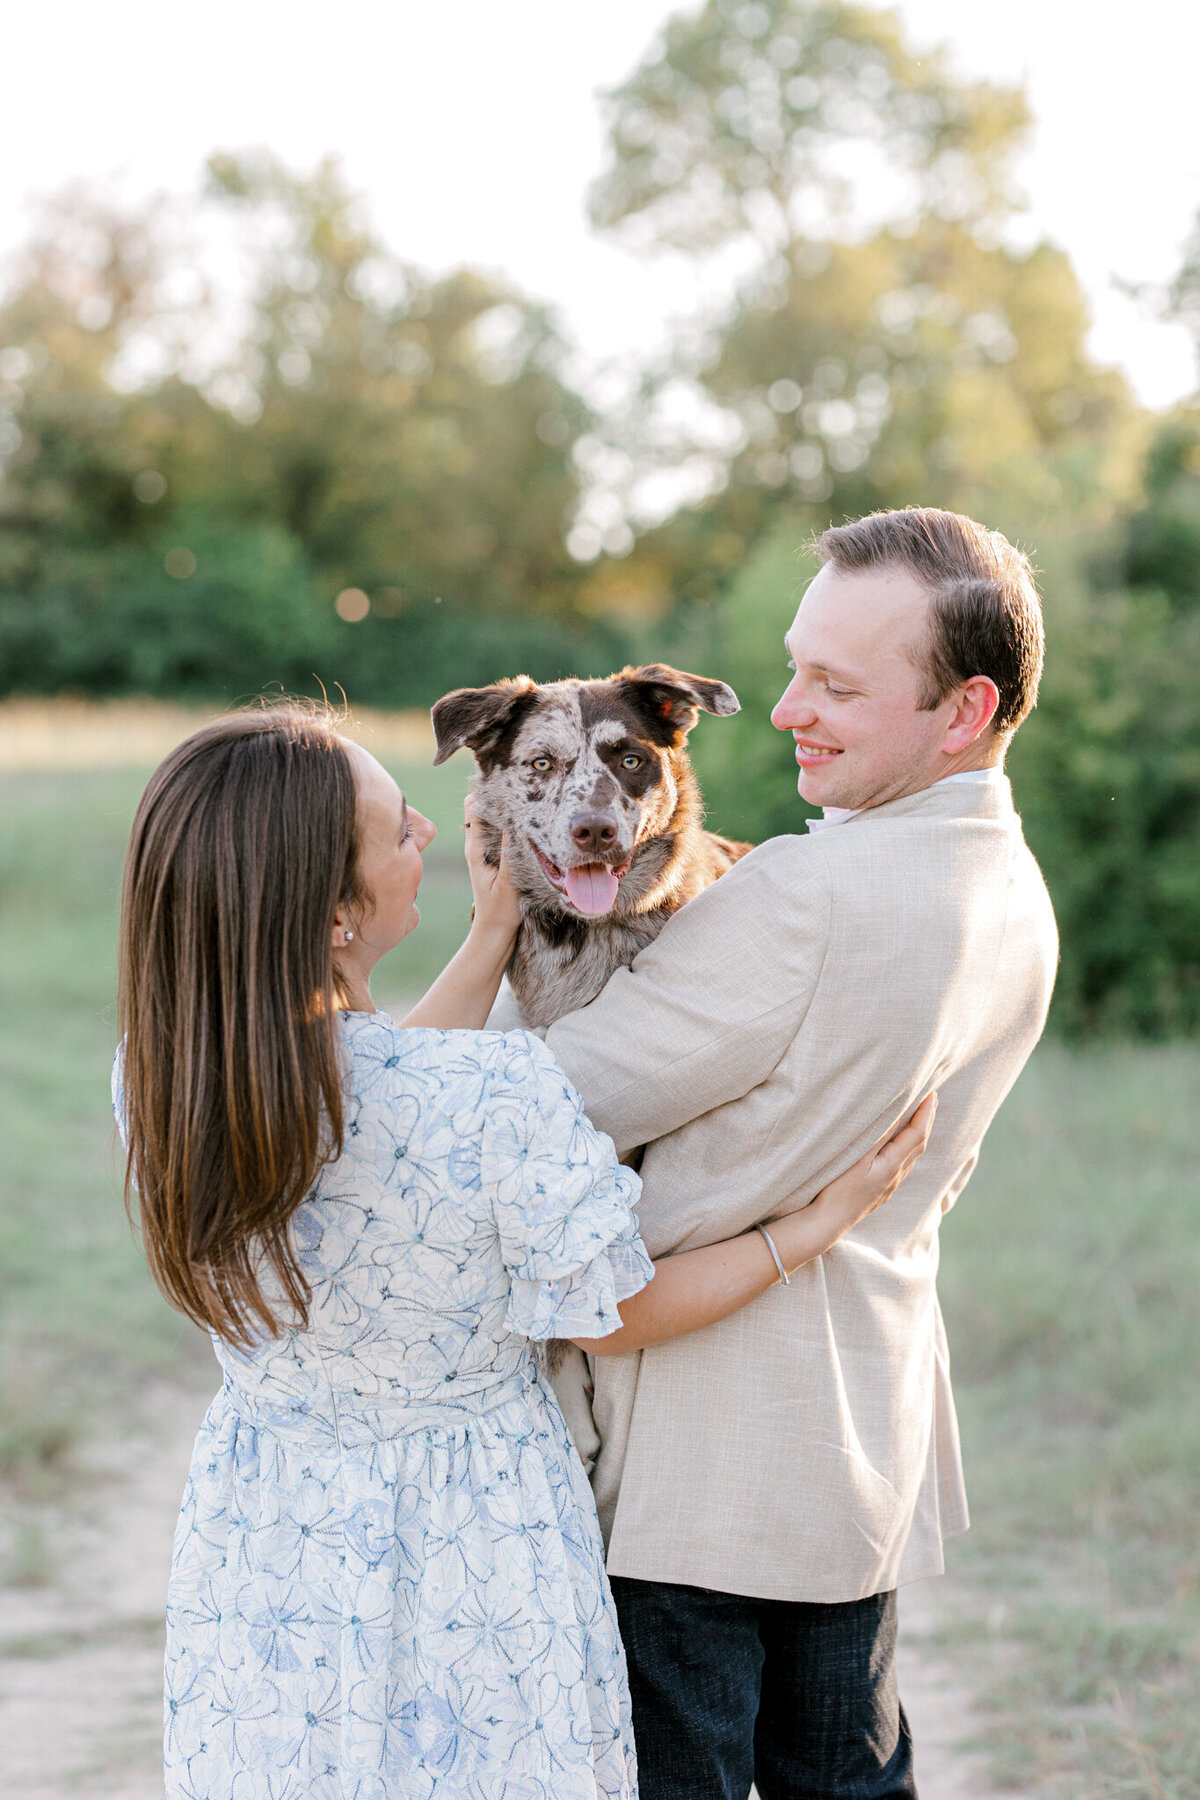 Mini Sessions at Norbuck Park | Dallas Portrait Photographer | Sami Kathryn Photography-51